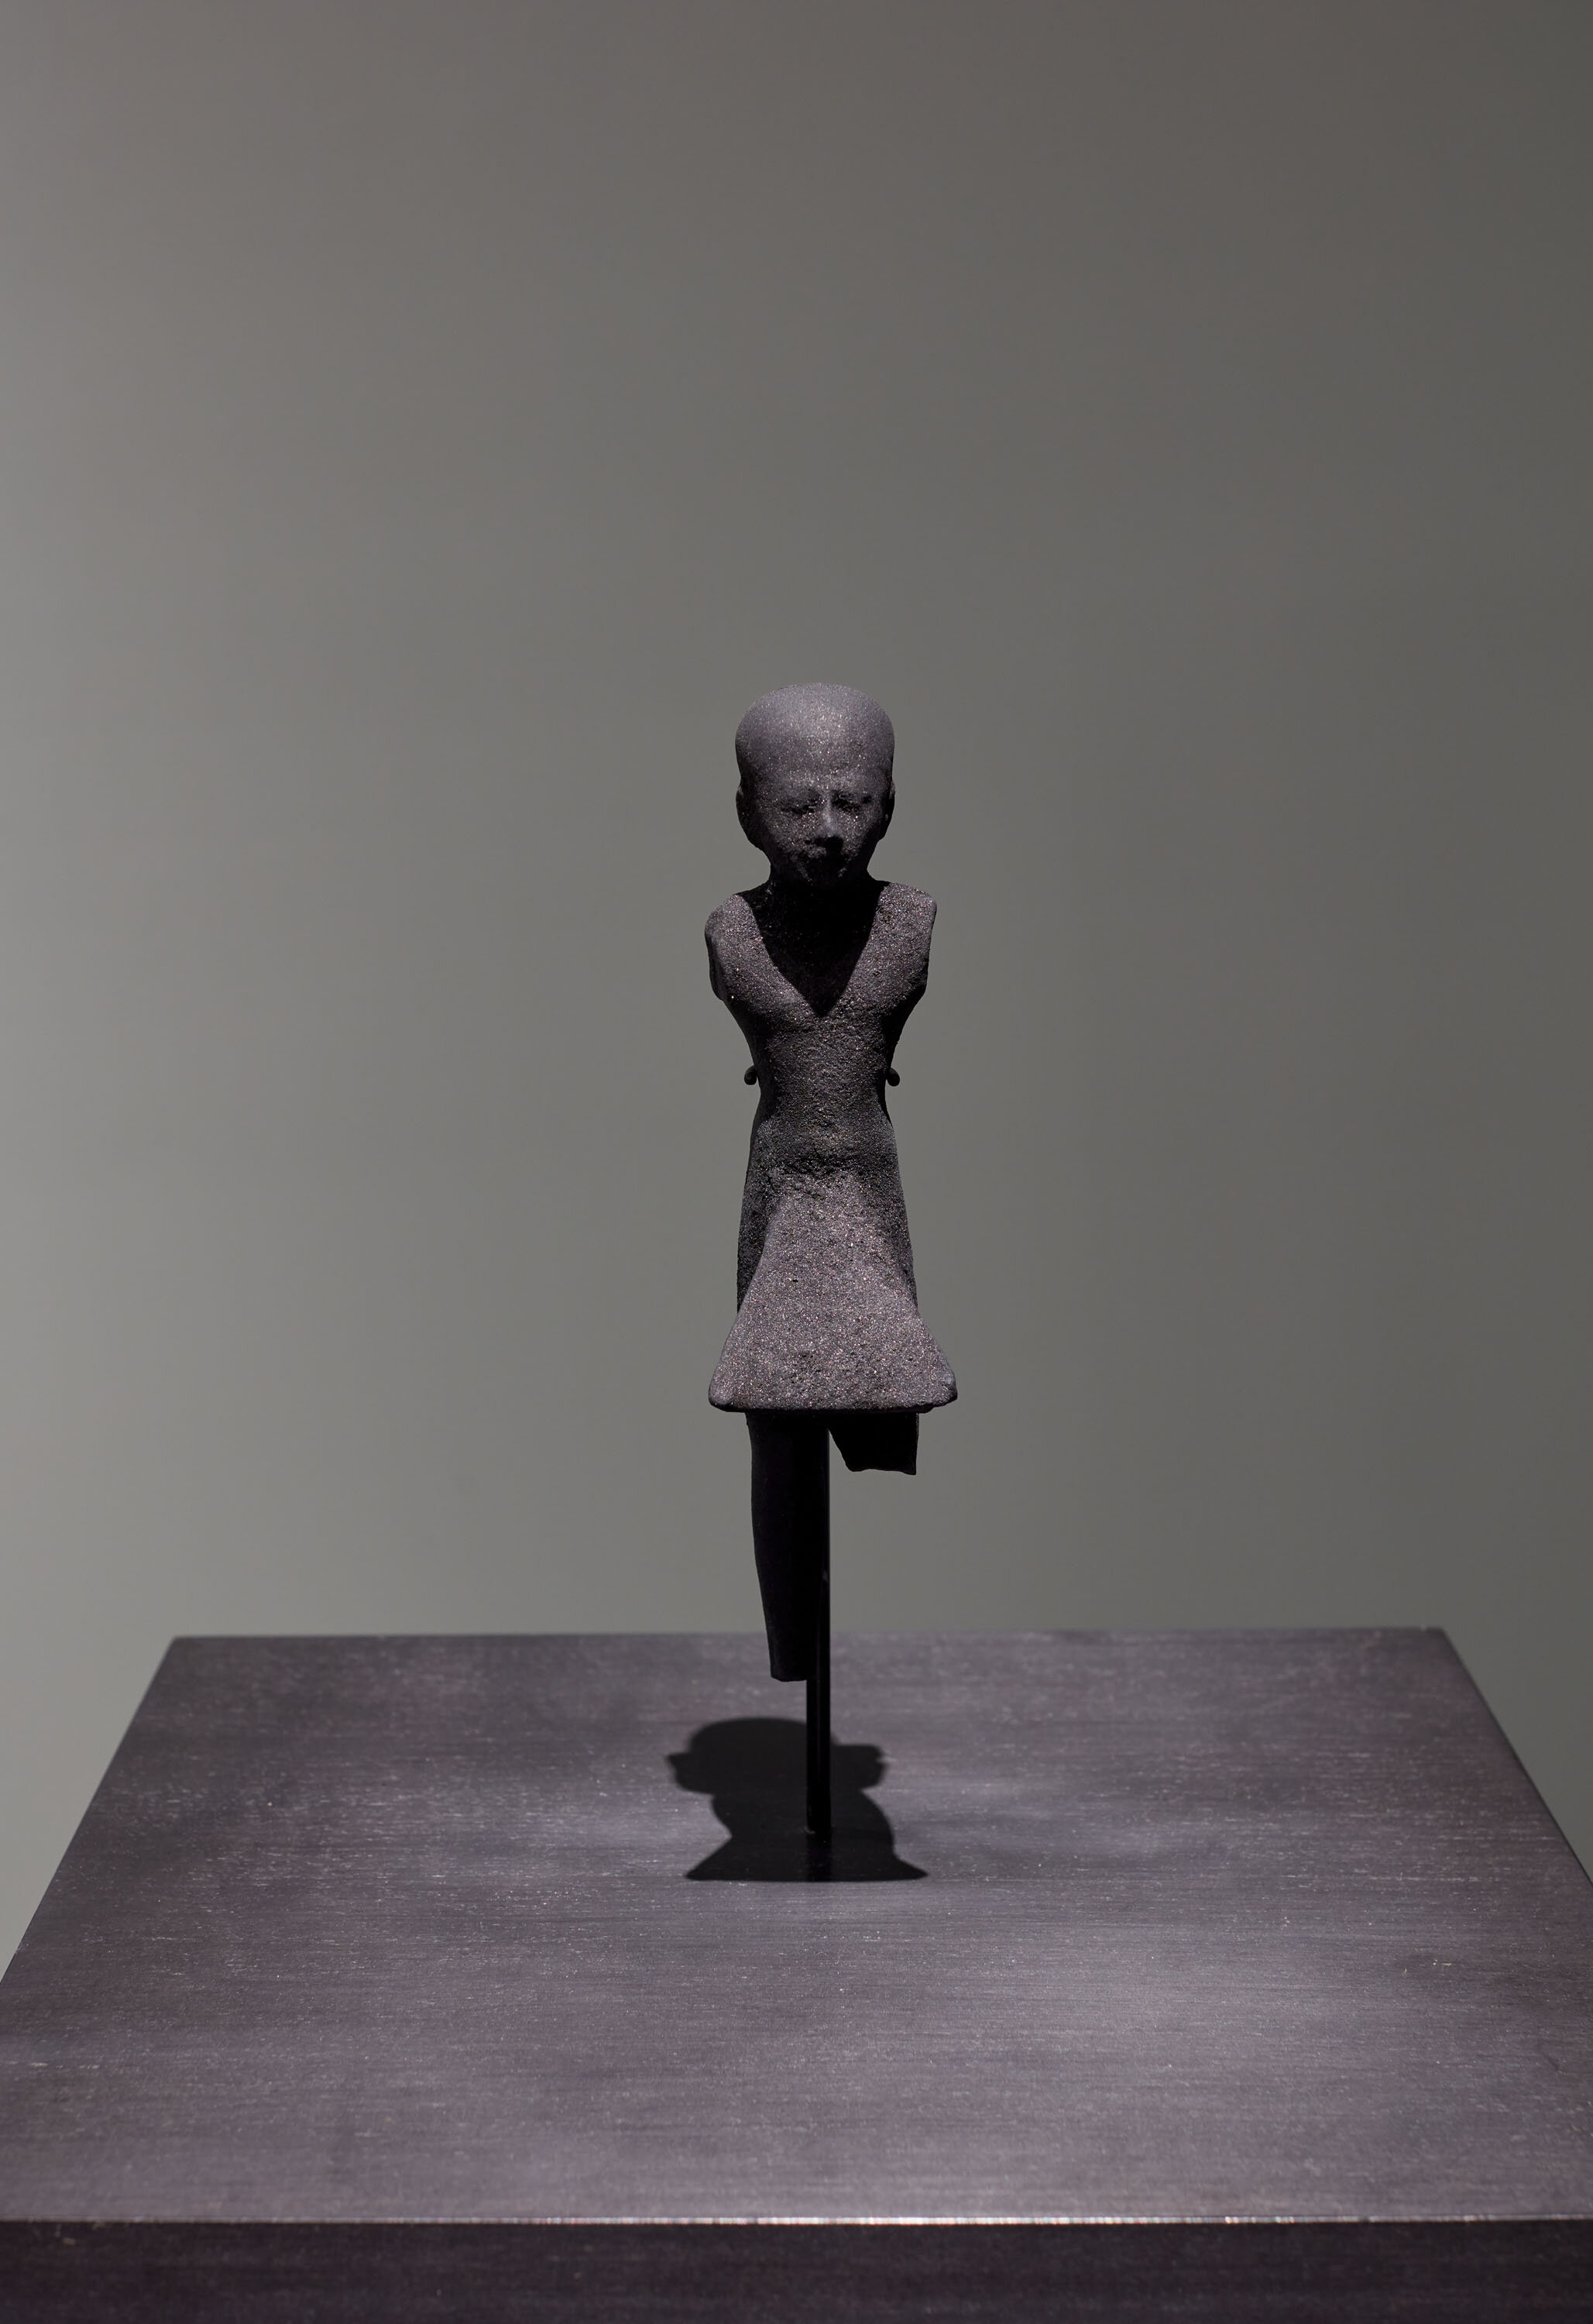 Amun Menkheperre, Museum of Ashes, 2019